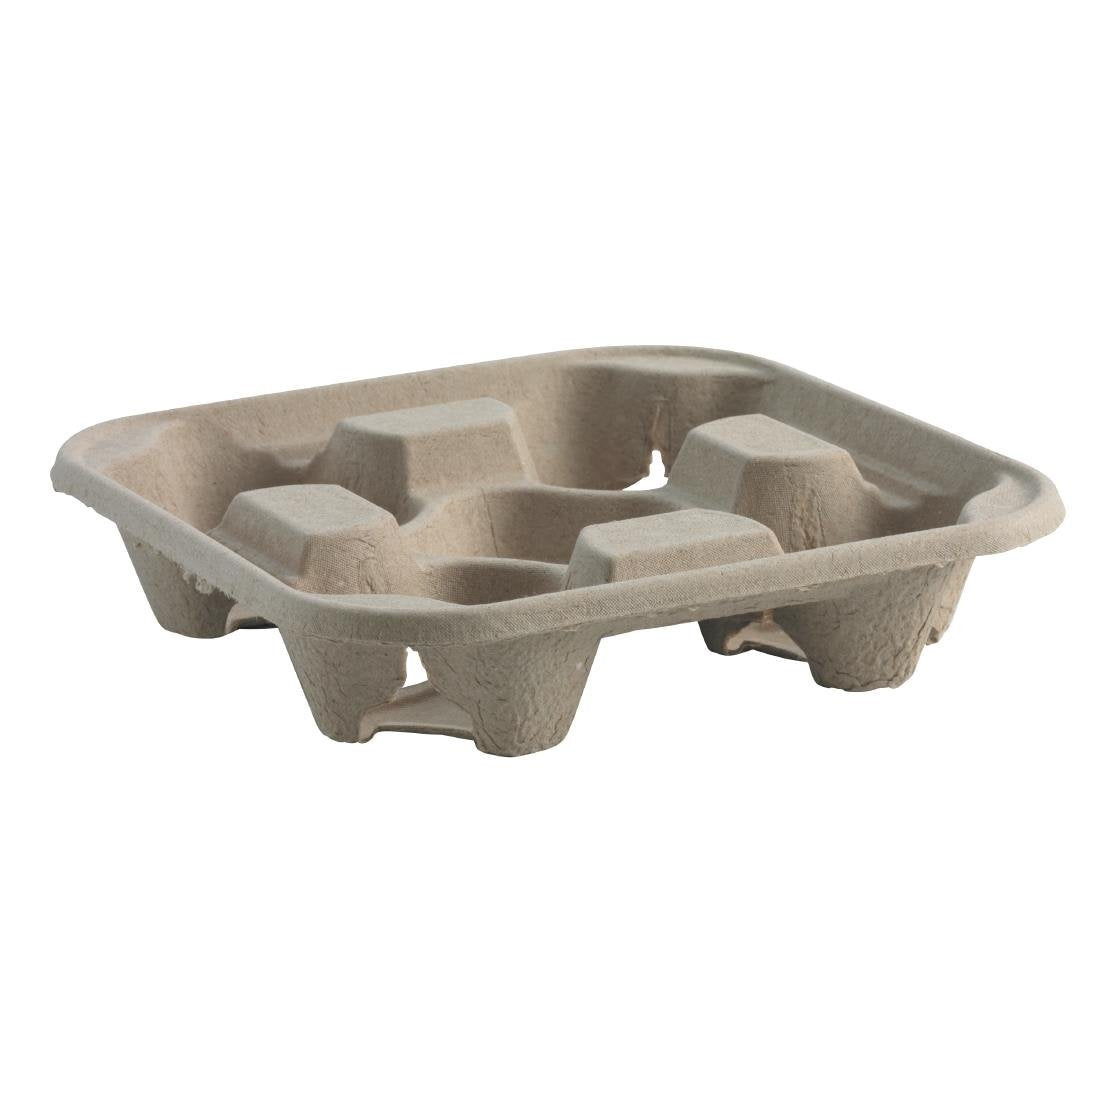 4 Cup Egg Board Carry Tray